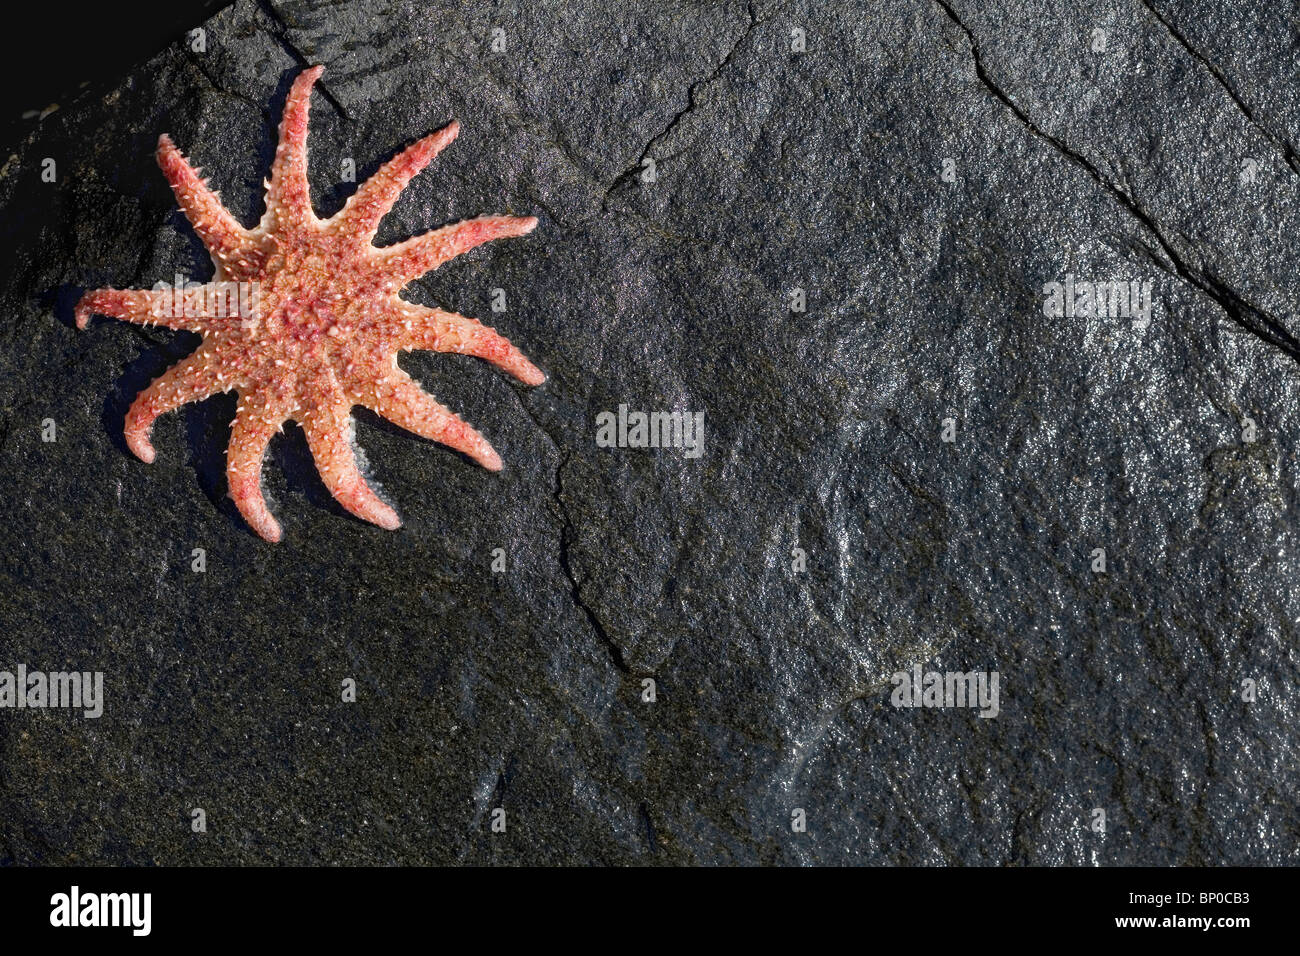 Star fish on a wet rock Stock Photo